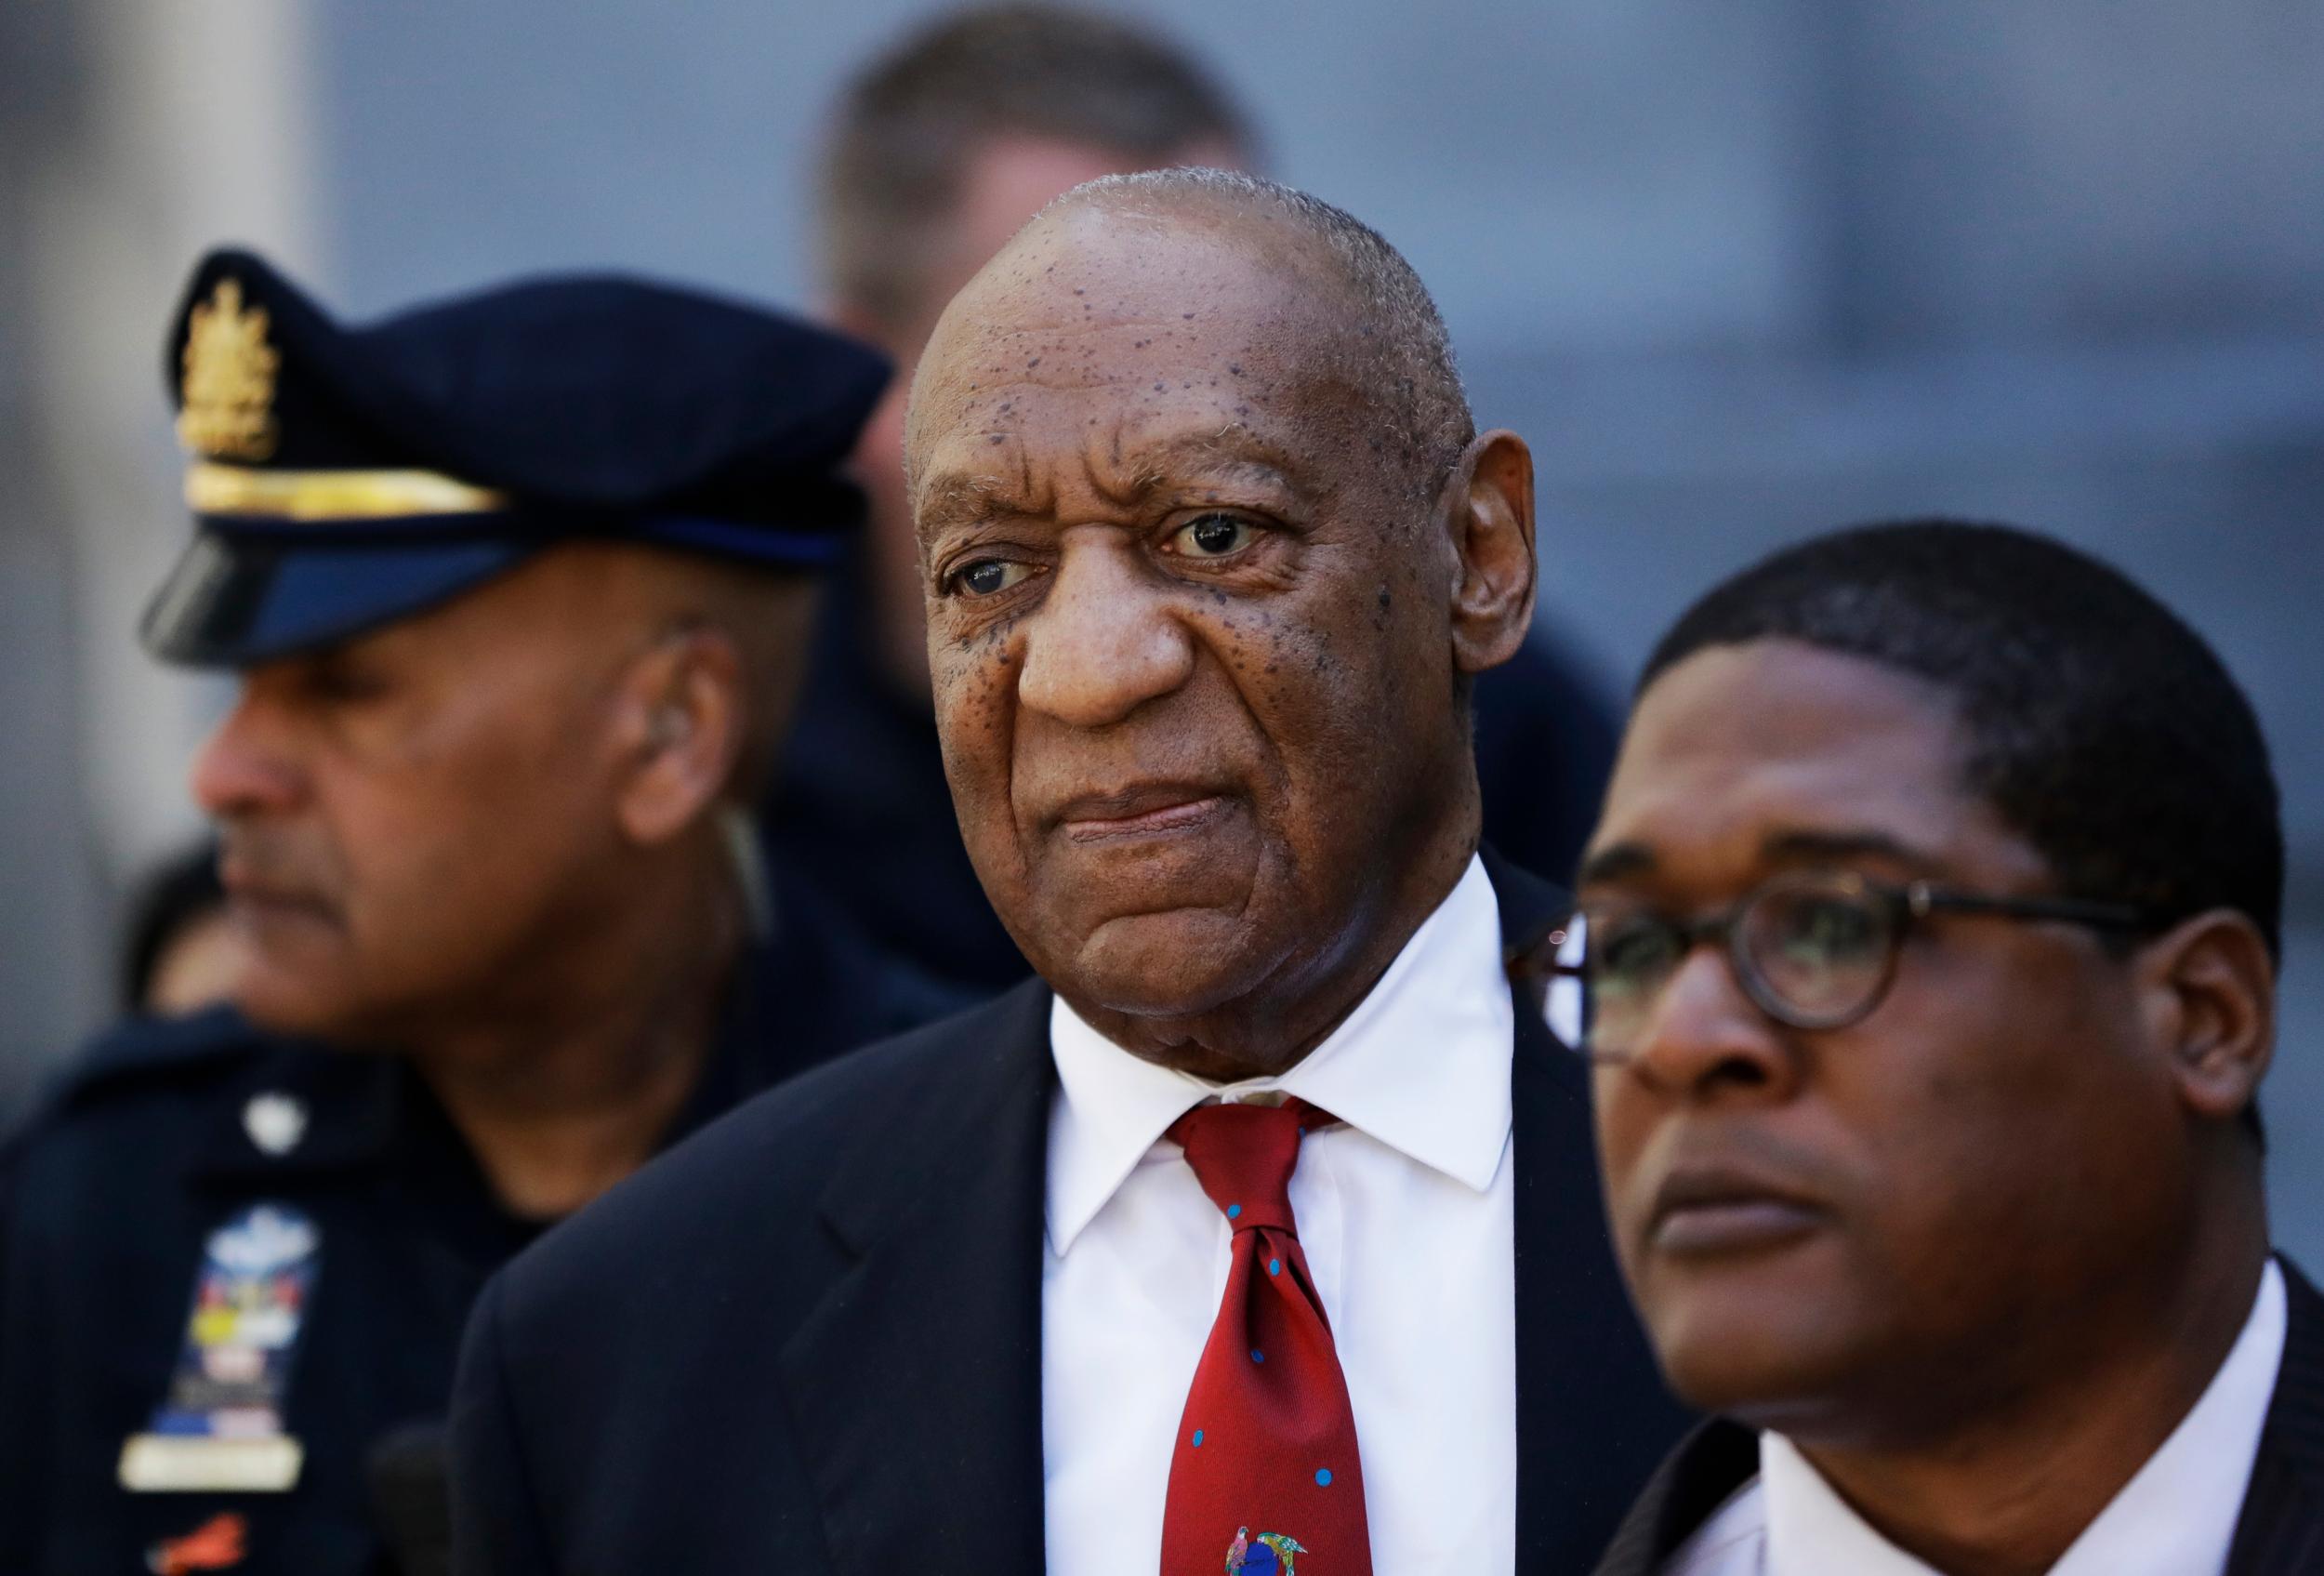 Cosby leaves the courthouse after he was found guilty of drugging and molesting a woman